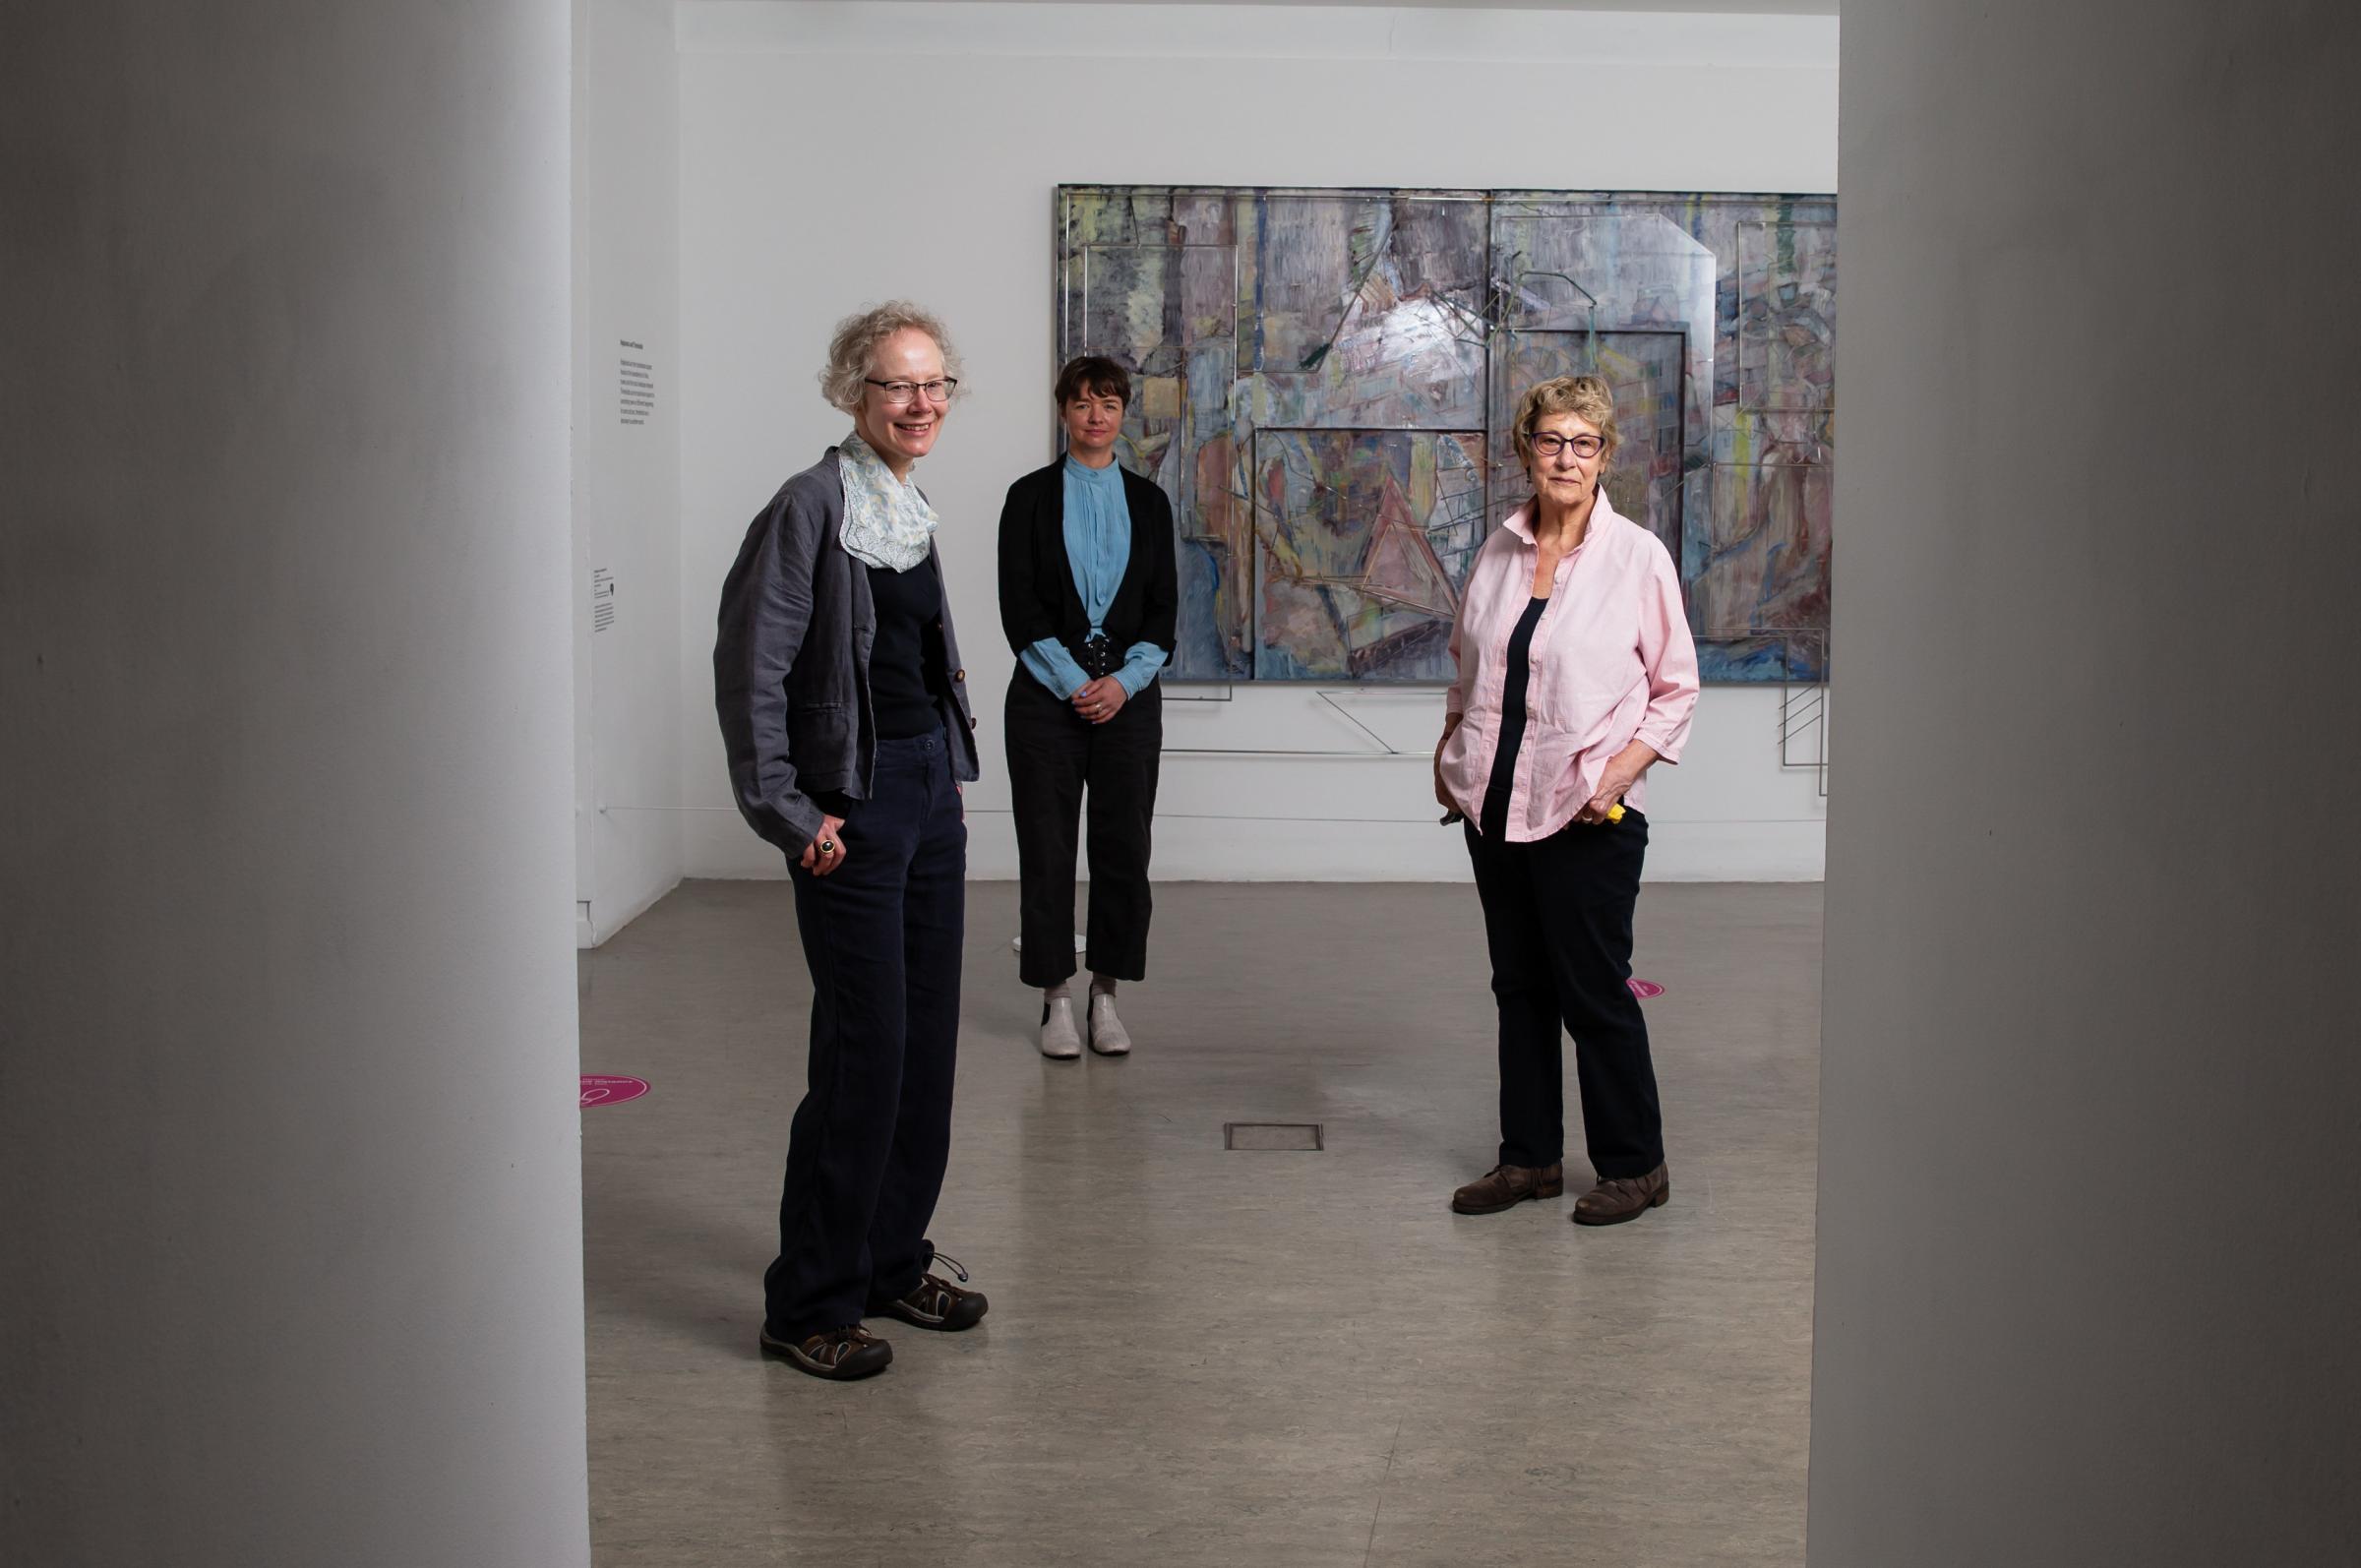 Three of the artists whose work is on display, they are from left - Jo Ganter, Kate V Robertson and Jacki Parry. The work in the background is Double Son of Rubble by artist Sara Barker. Photograph by Colin Mearns.